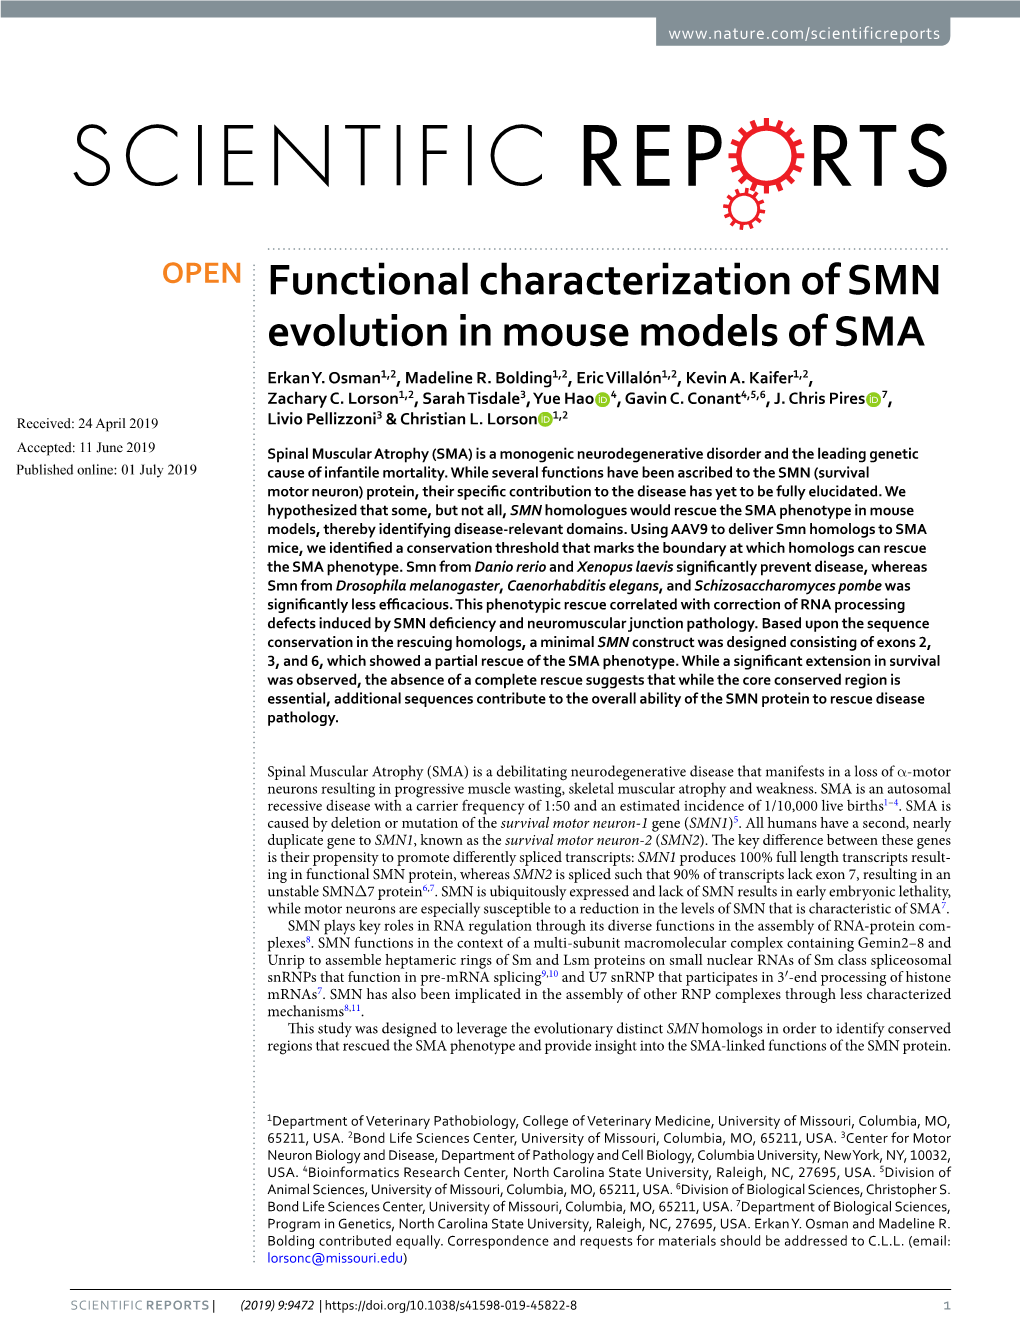 Functional Characterization of SMN Evolution in Mouse Models of SMA Erkan Y